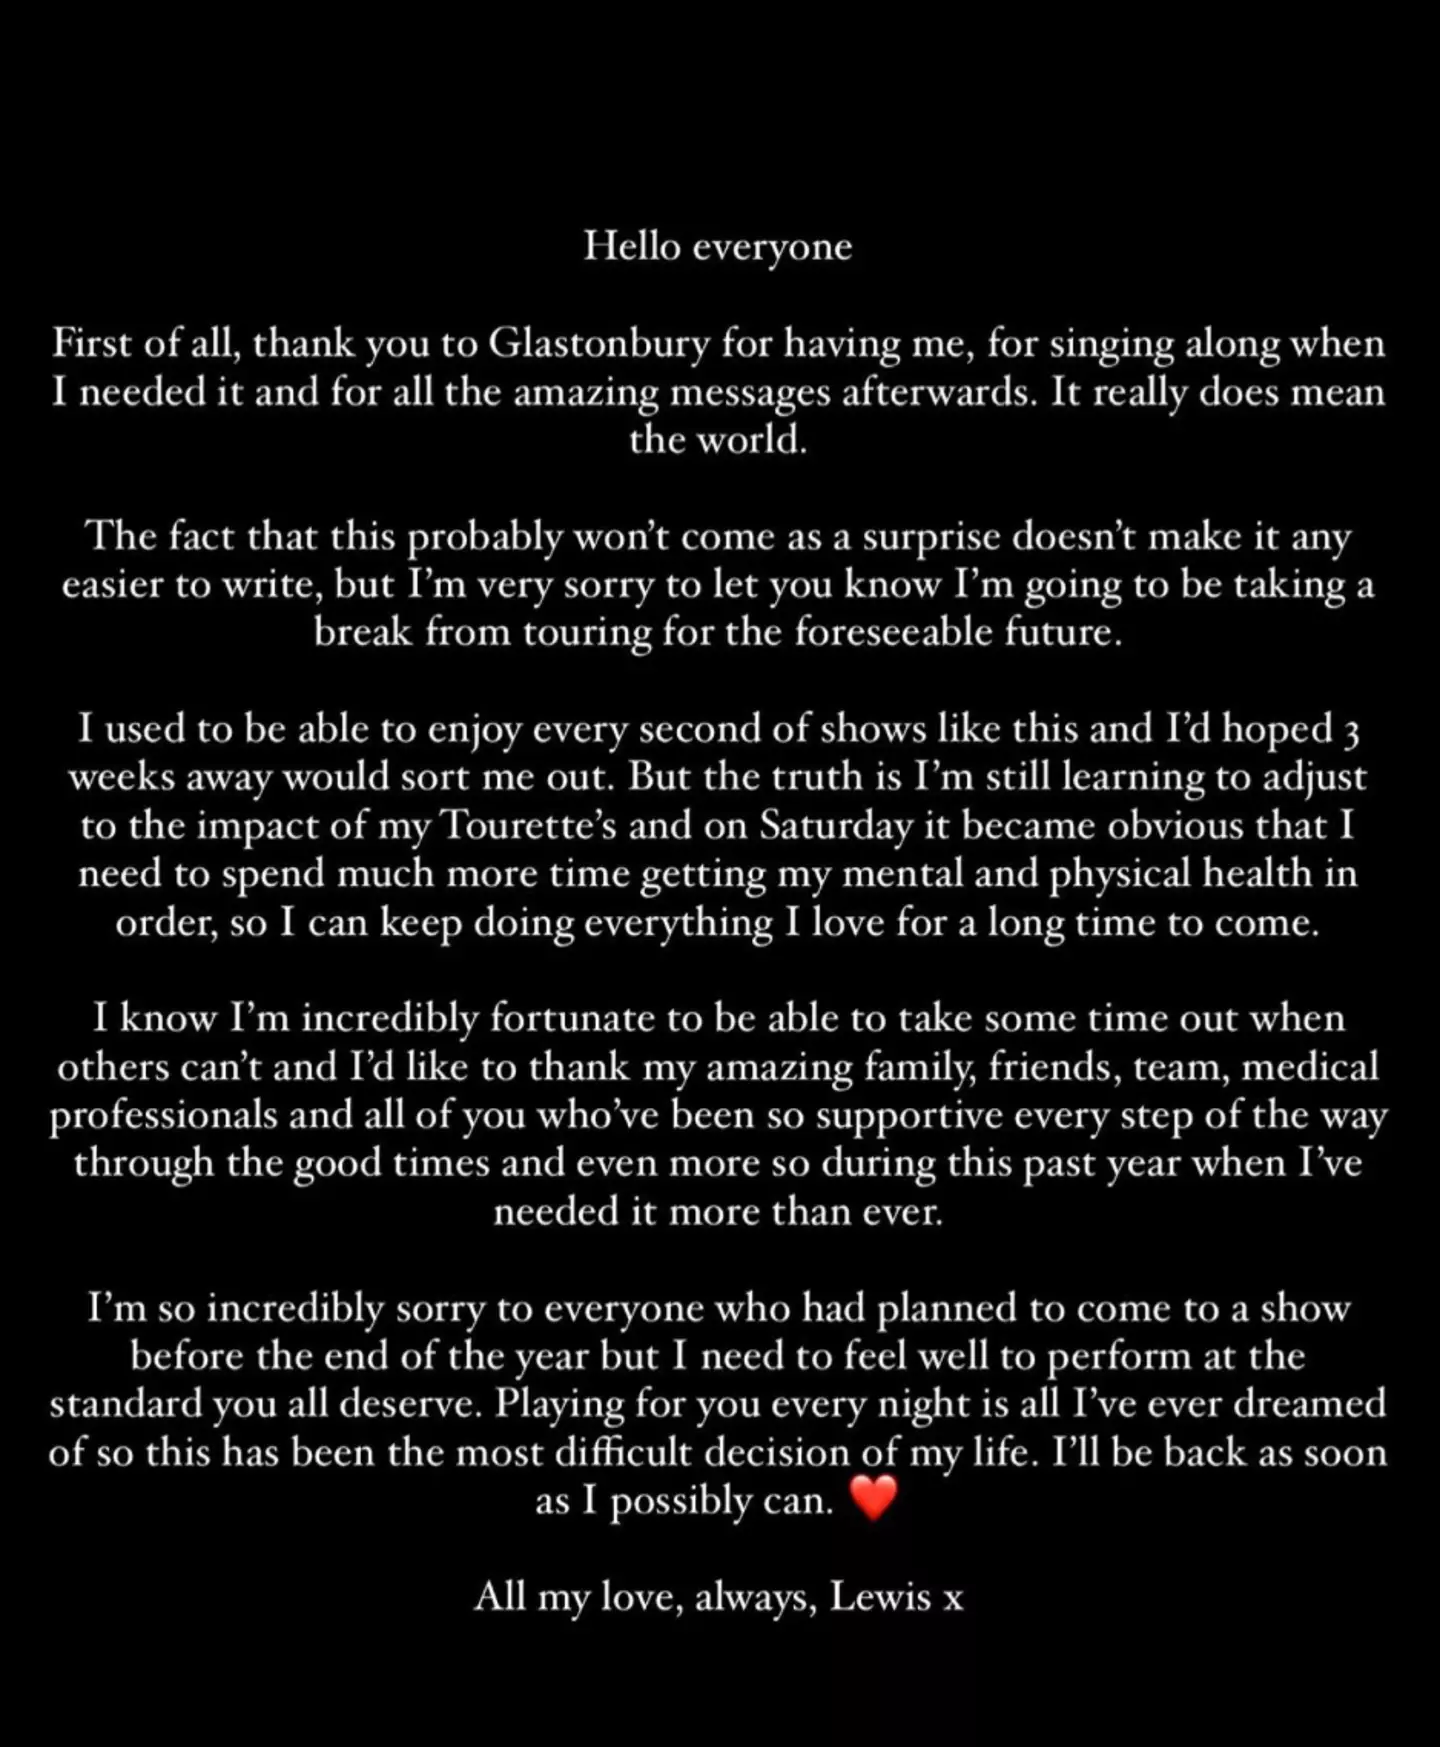 Lewis Capaldi released the following statement on his Instagram.